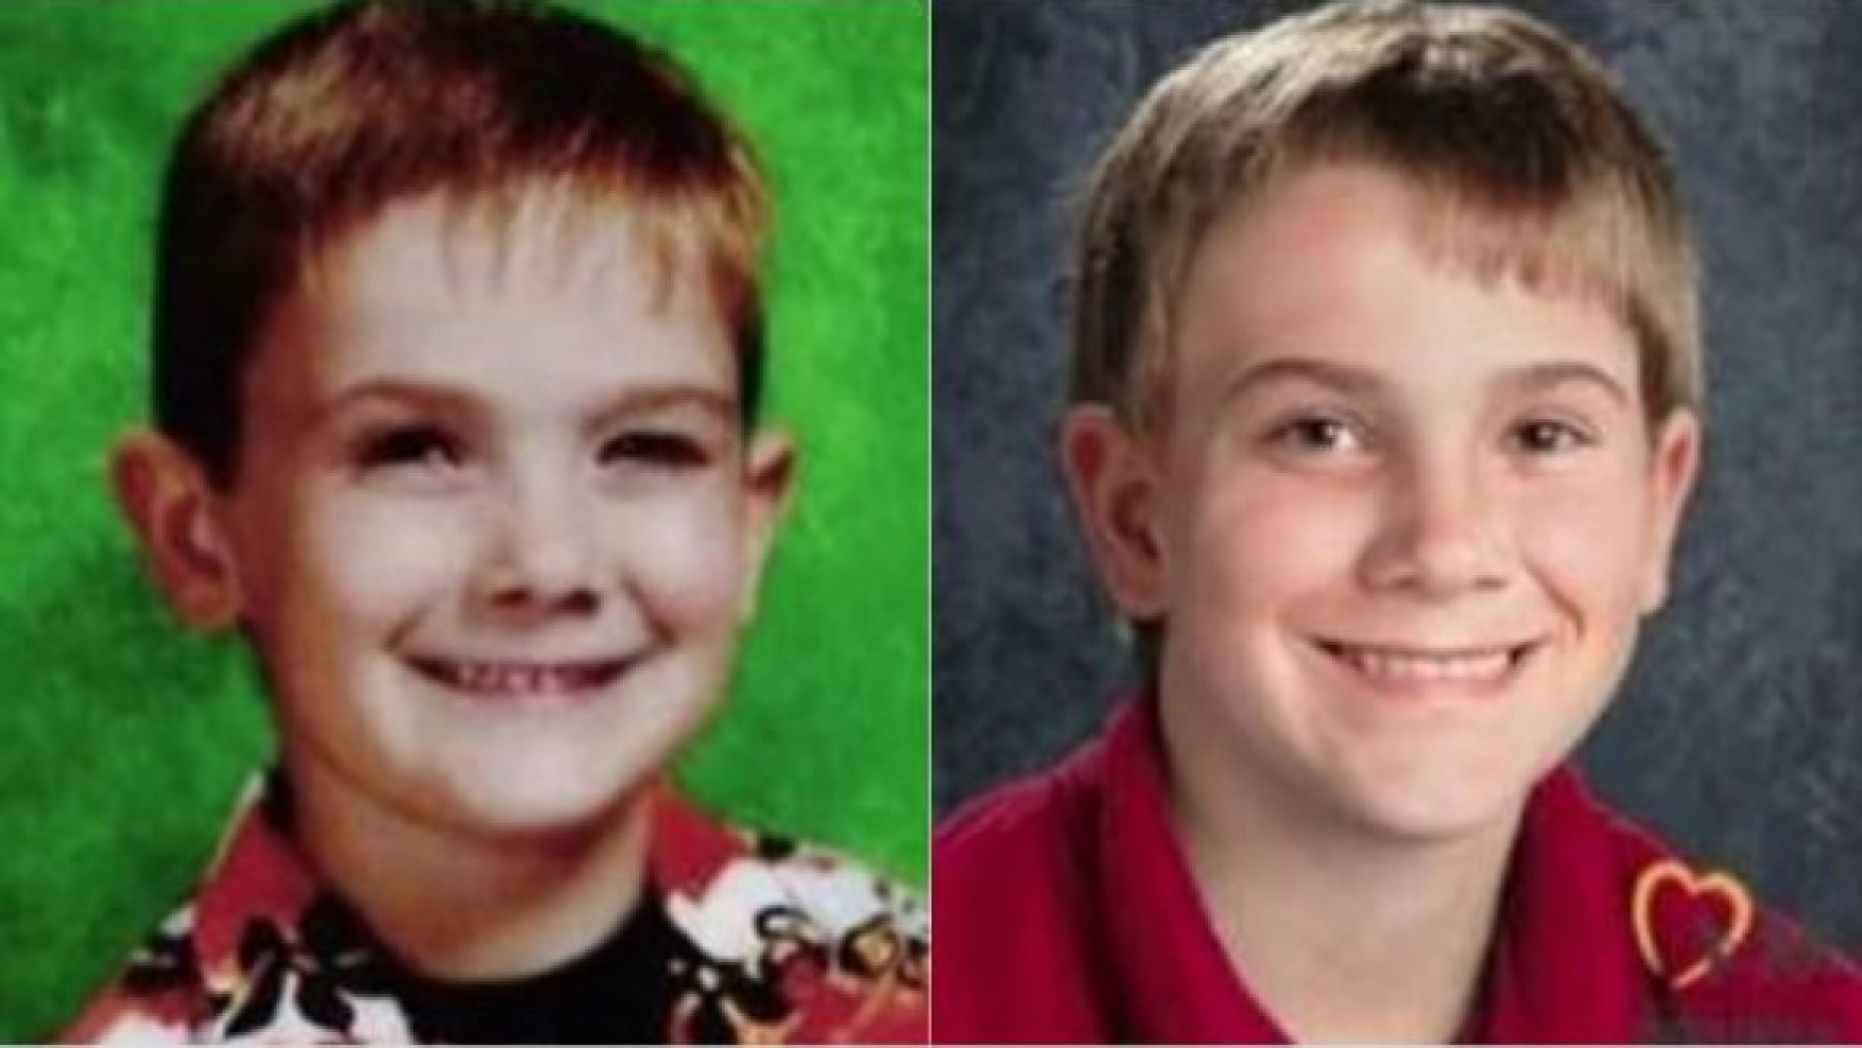 Ohio teen tells investigators hes Timmothy Pitzen, child who disappeared in Illinois in 2011: report